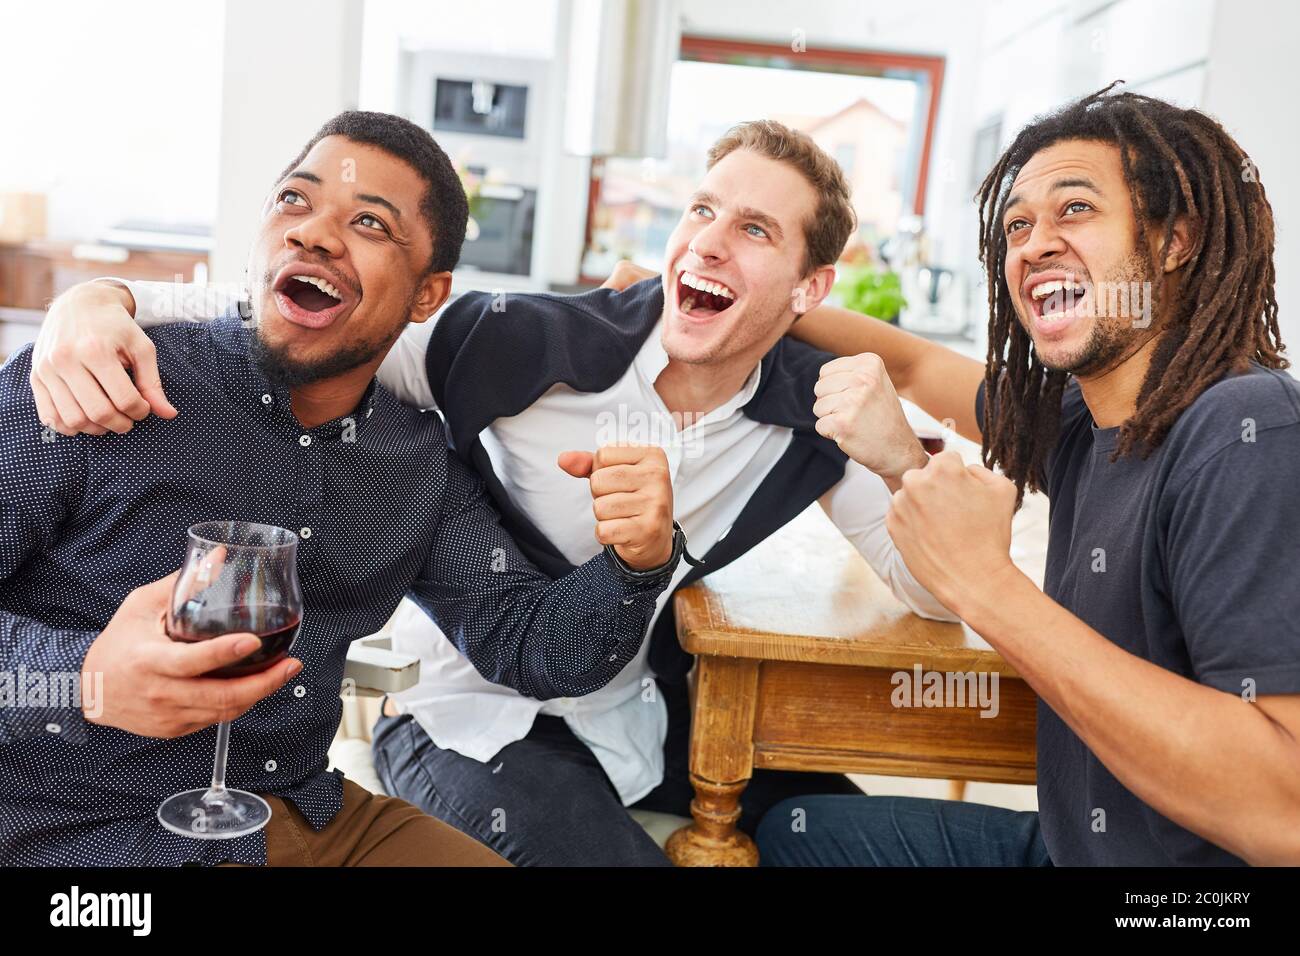 Friendly men cheer together while watching football or sport at home Stock Photo